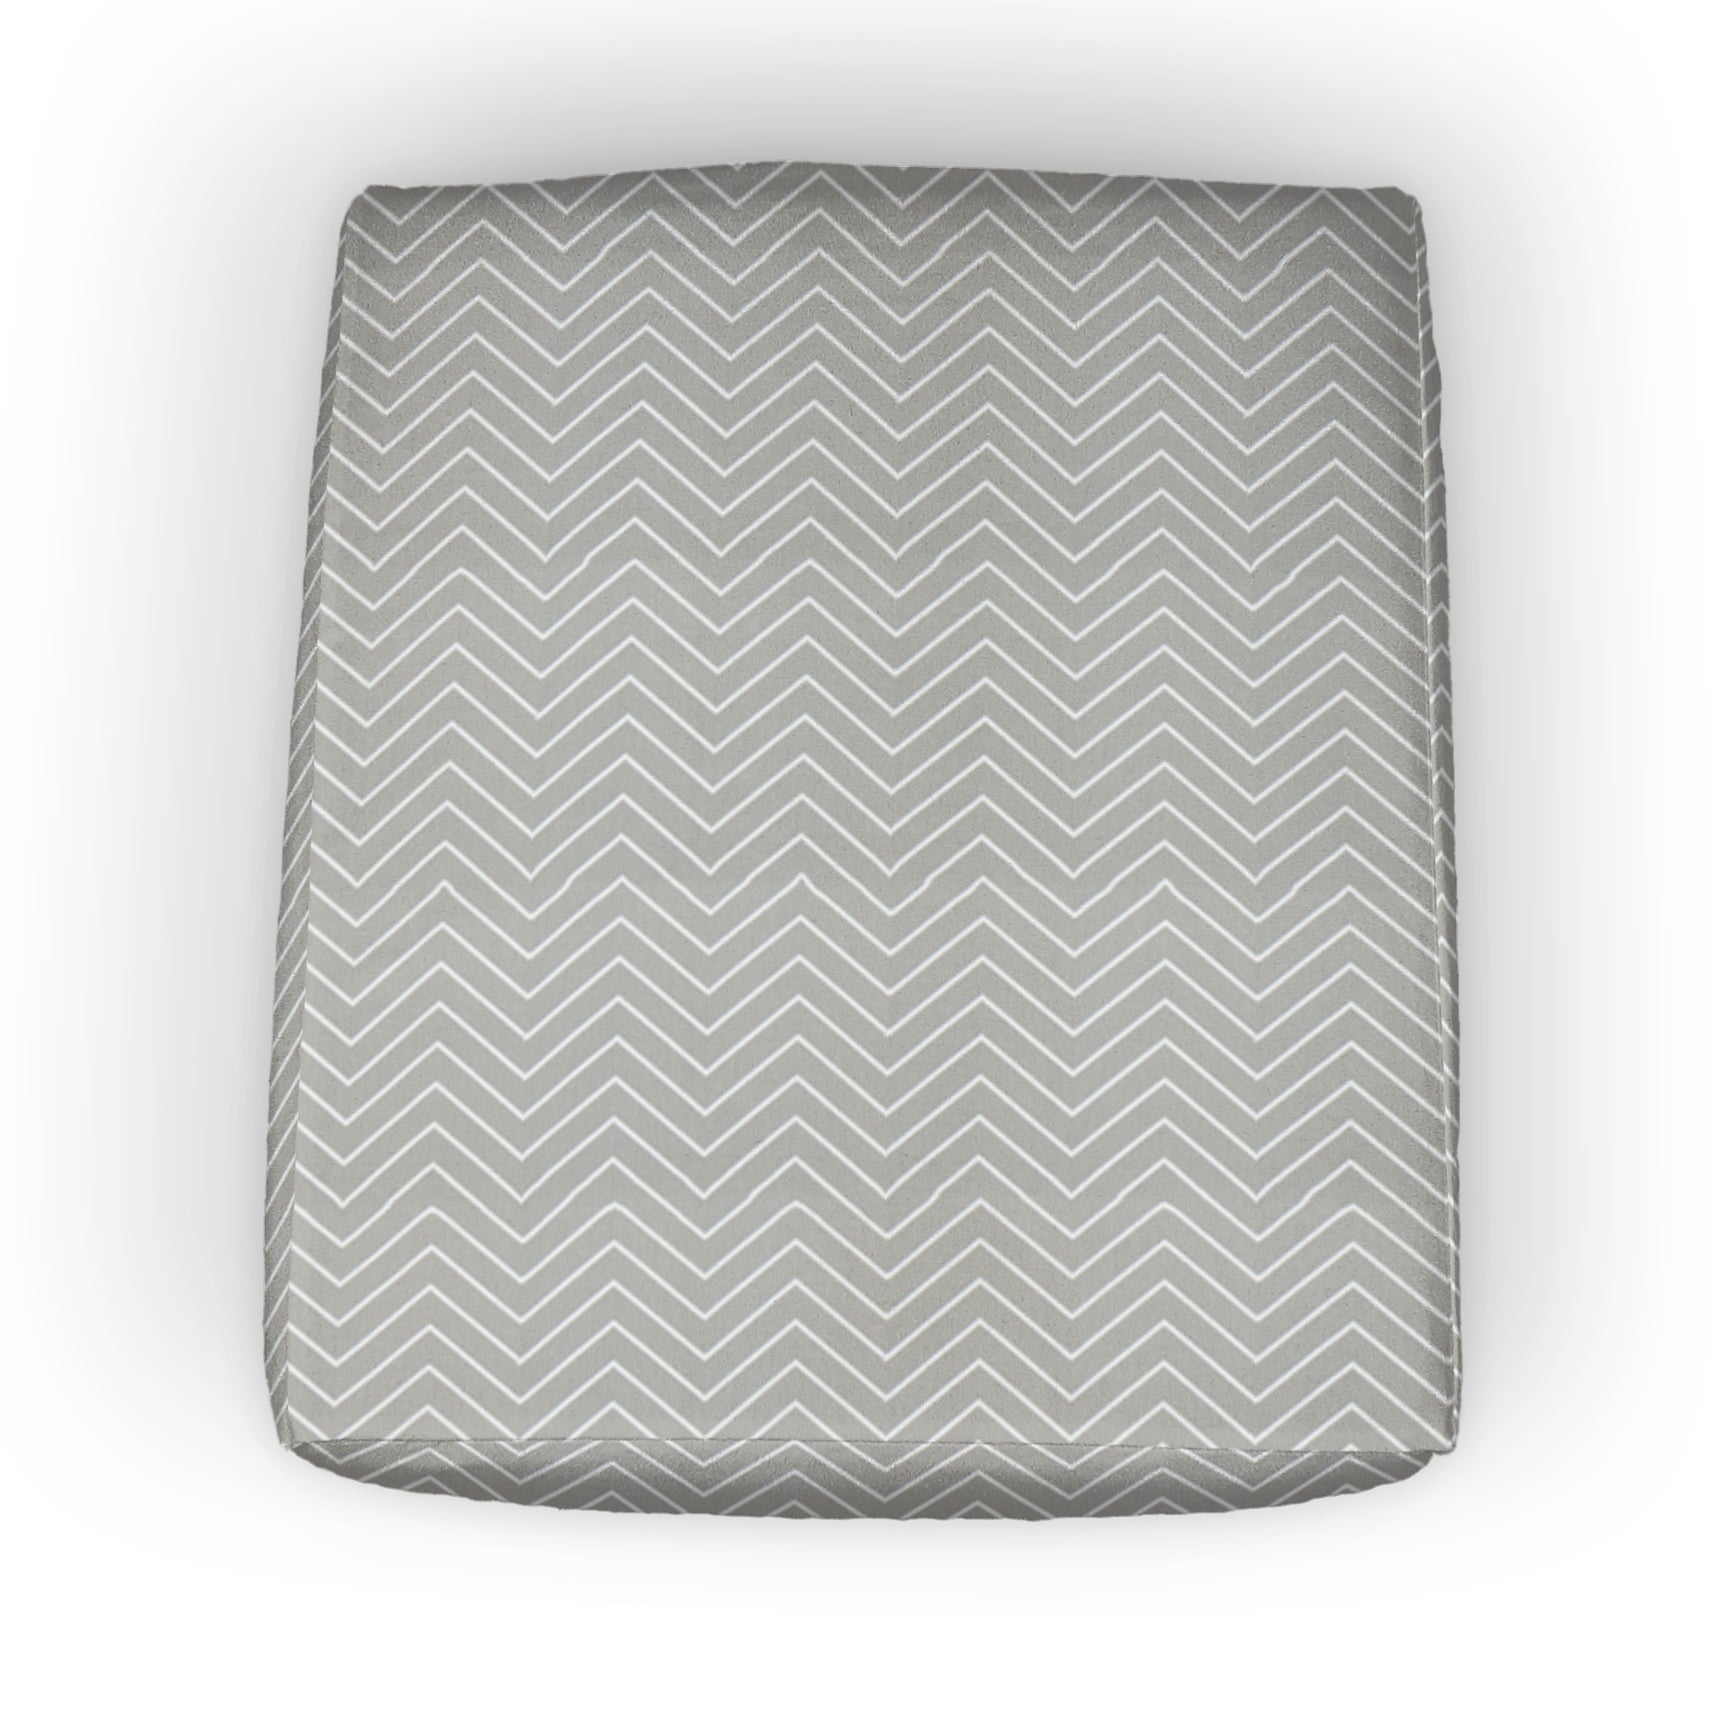 Fabric Sample Only 3x5 inch - Chevron Cotton